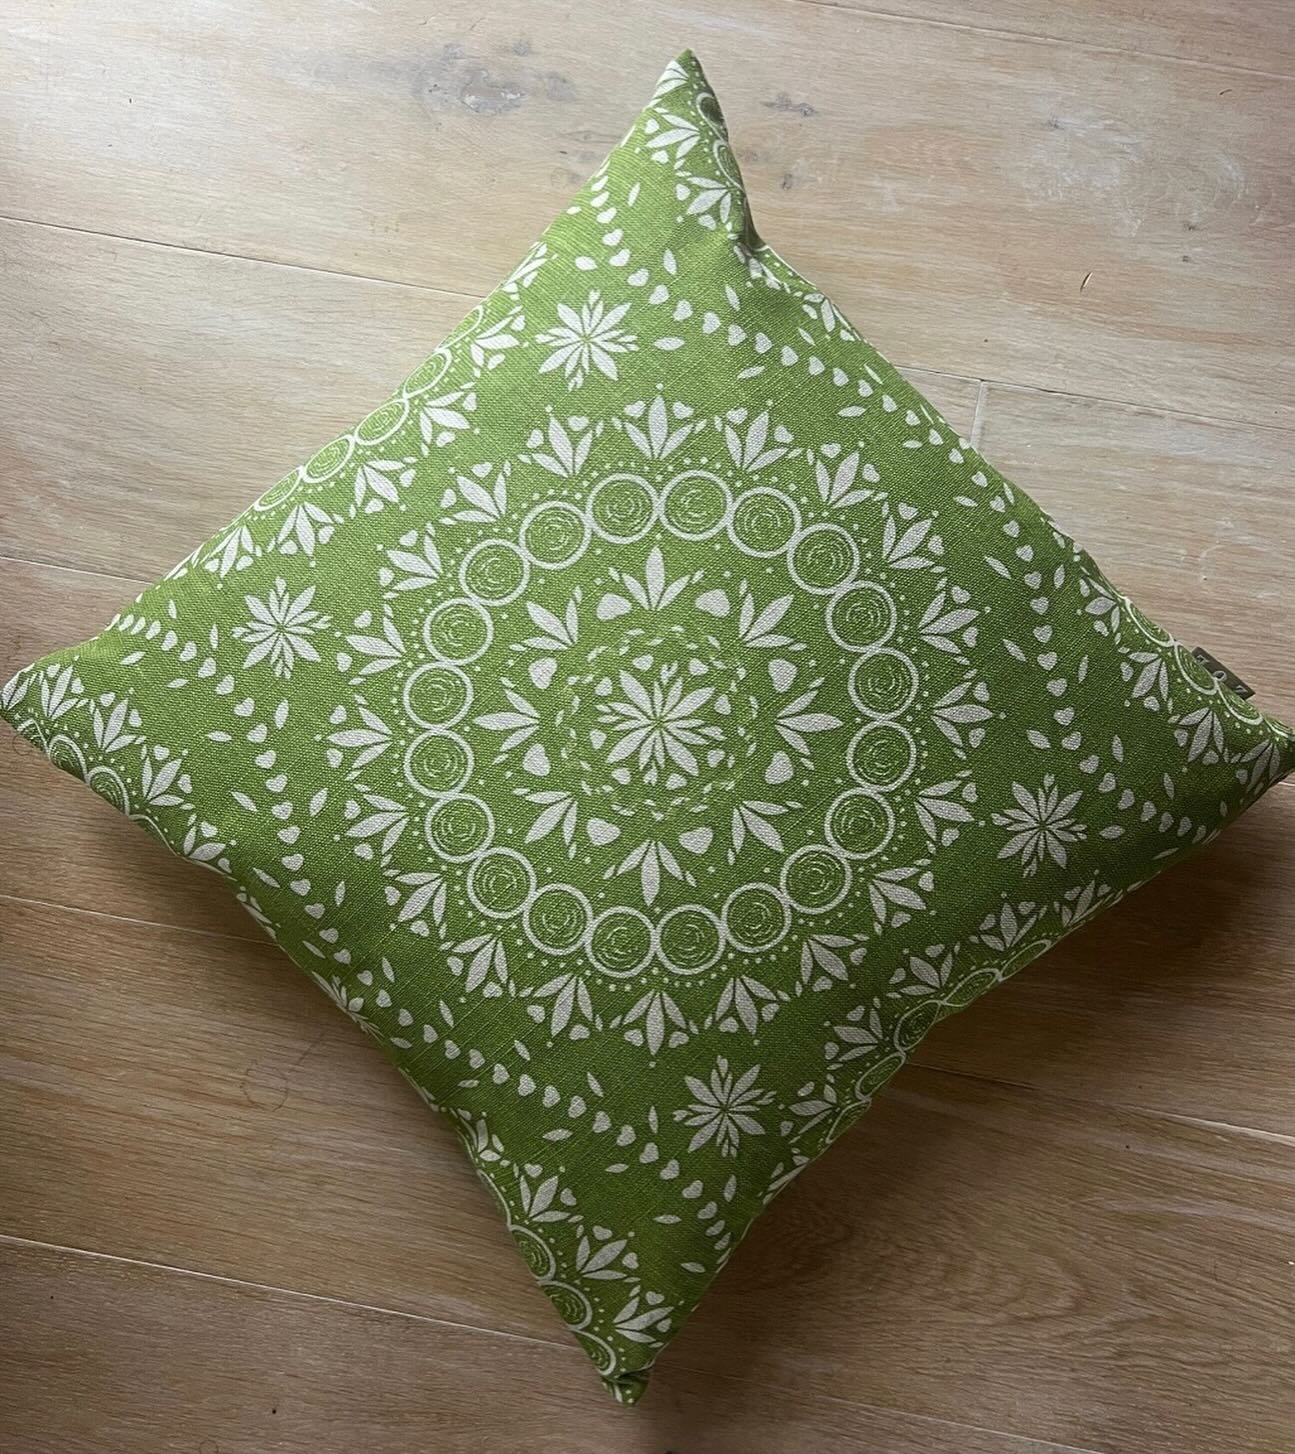 Palma Sol Apple Green cushions are back in stock, perfect for an instant spring colour quick fix! 💚🍏

#zoeglencross #zoeglencrossfabrics #zoeglencrosscushions #greencushions #printedlinen #greeninteriors